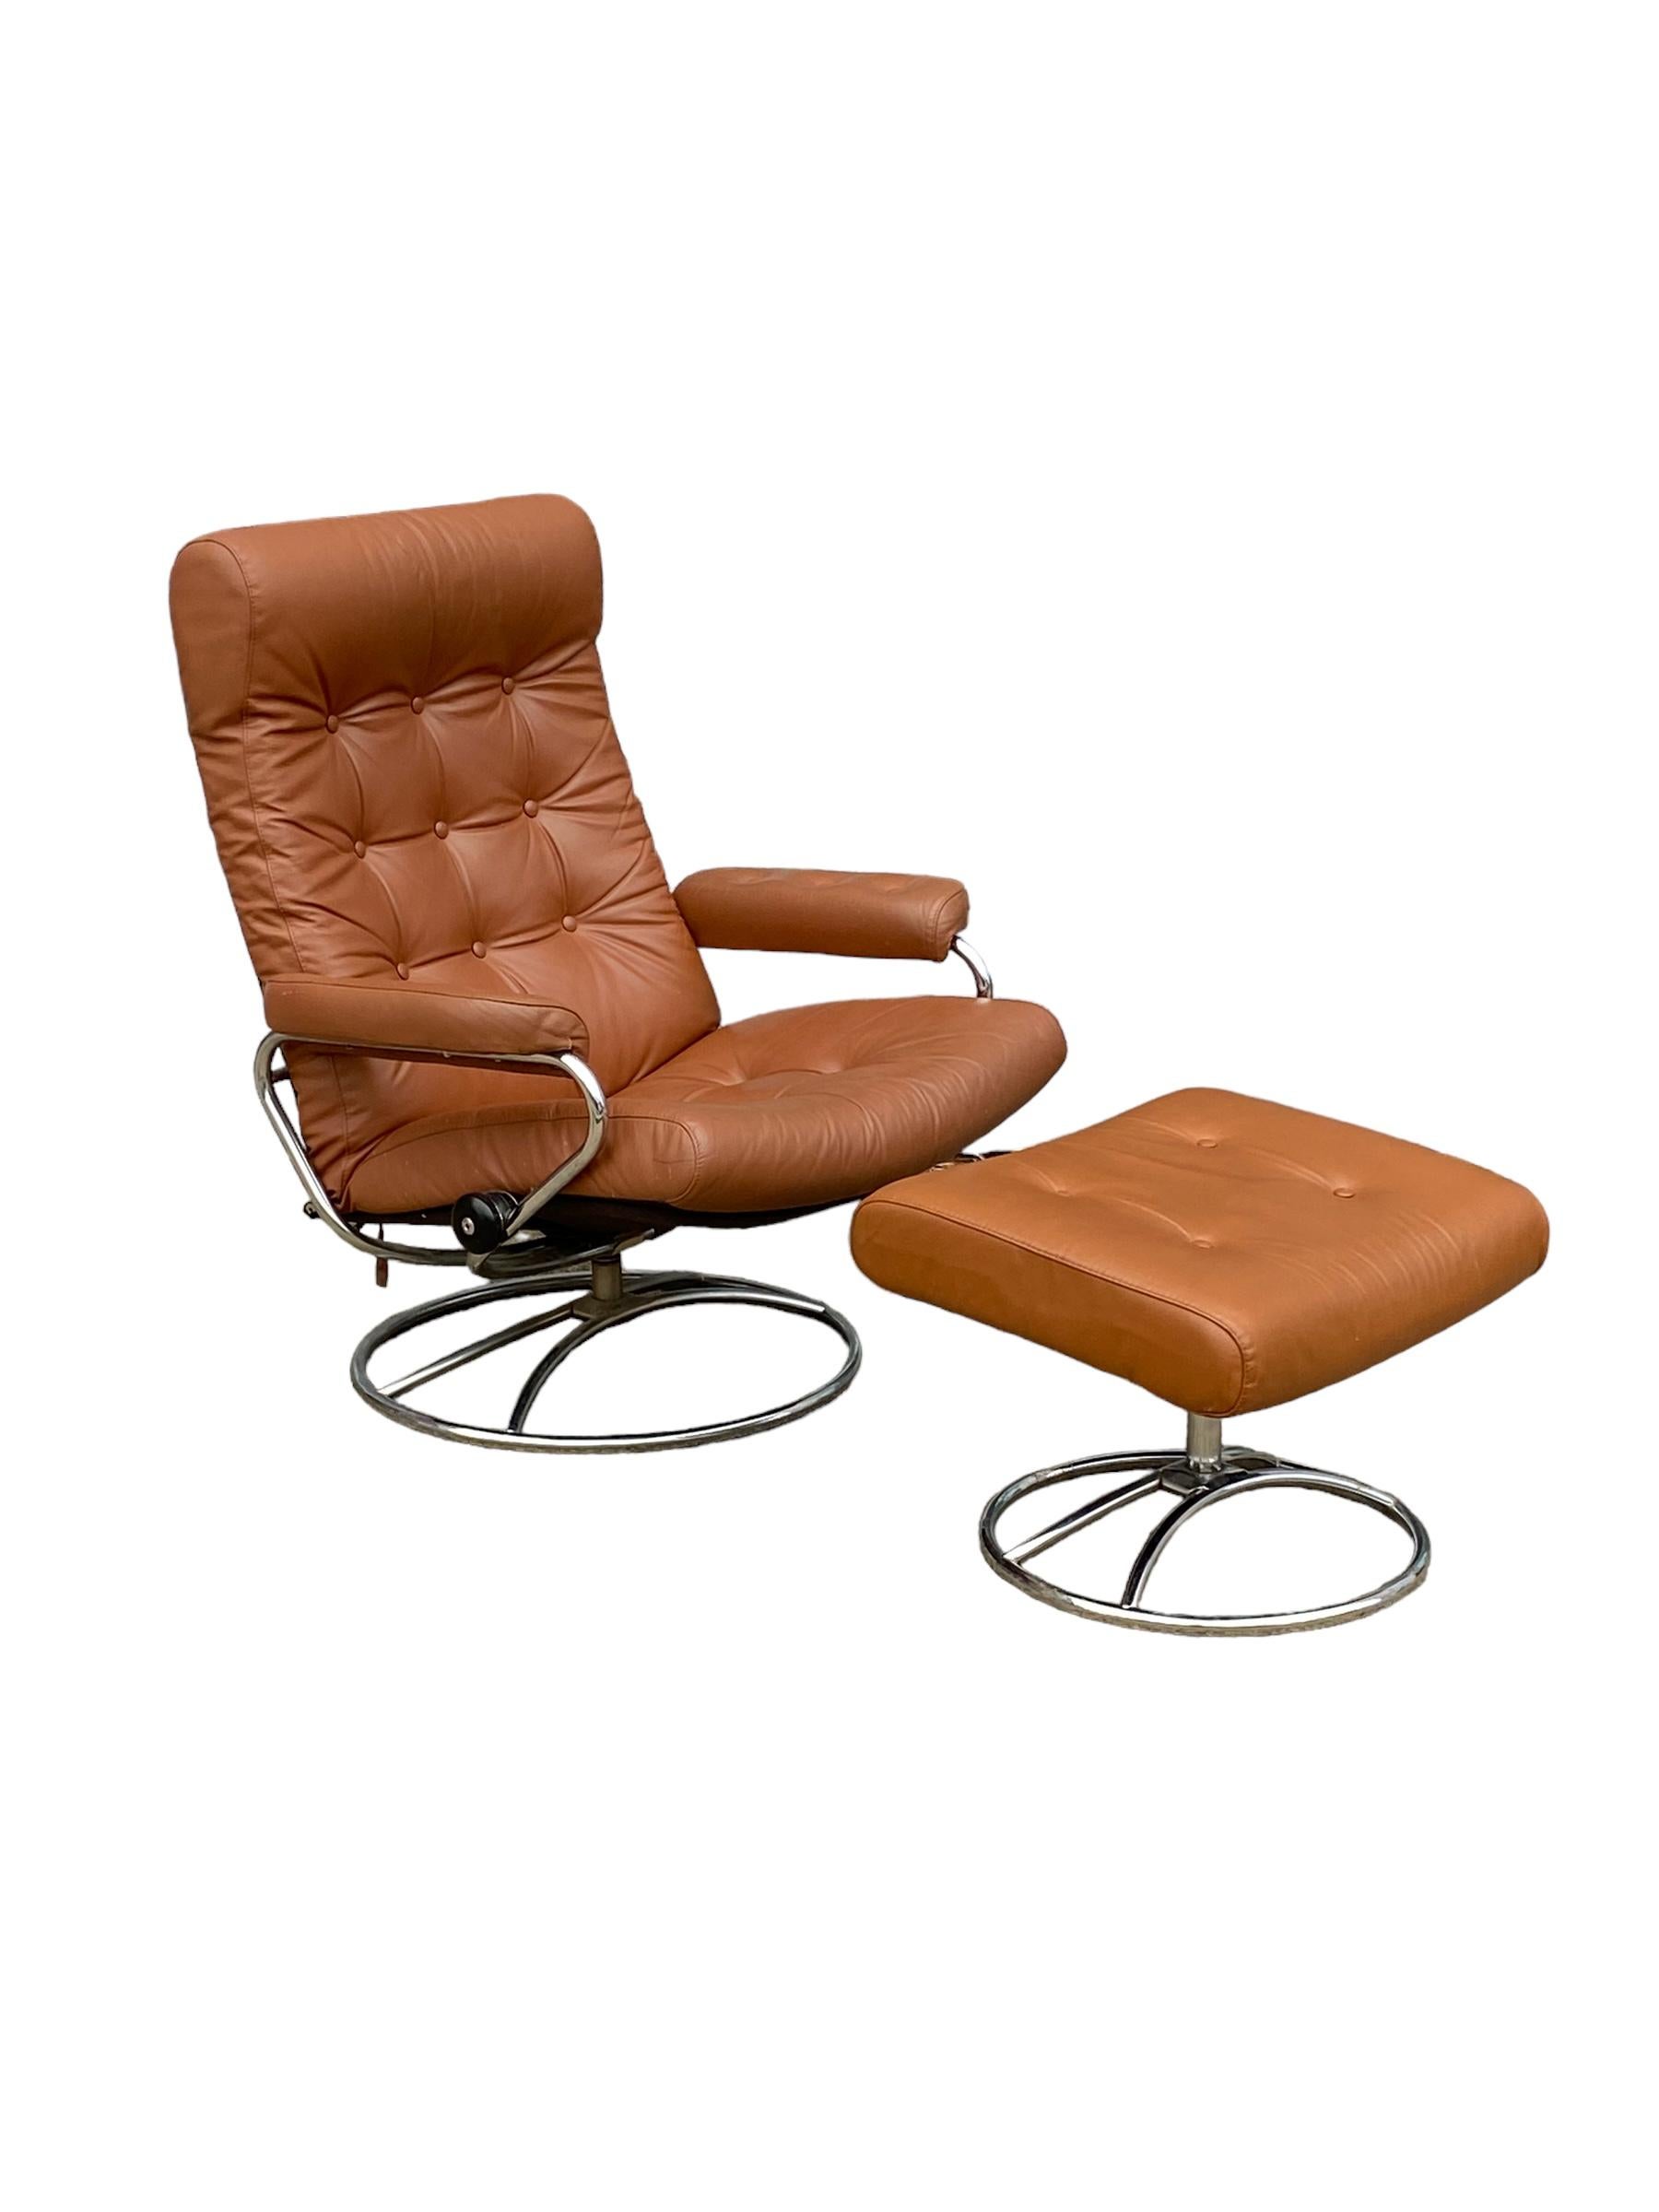 Ekornes Stressless reclining lounge chair and ottoman. Elegant mid century Scandinavian design with tubular bent chrome frame and cognac brown leather cushion. Lounge in comfort with this timeless design.